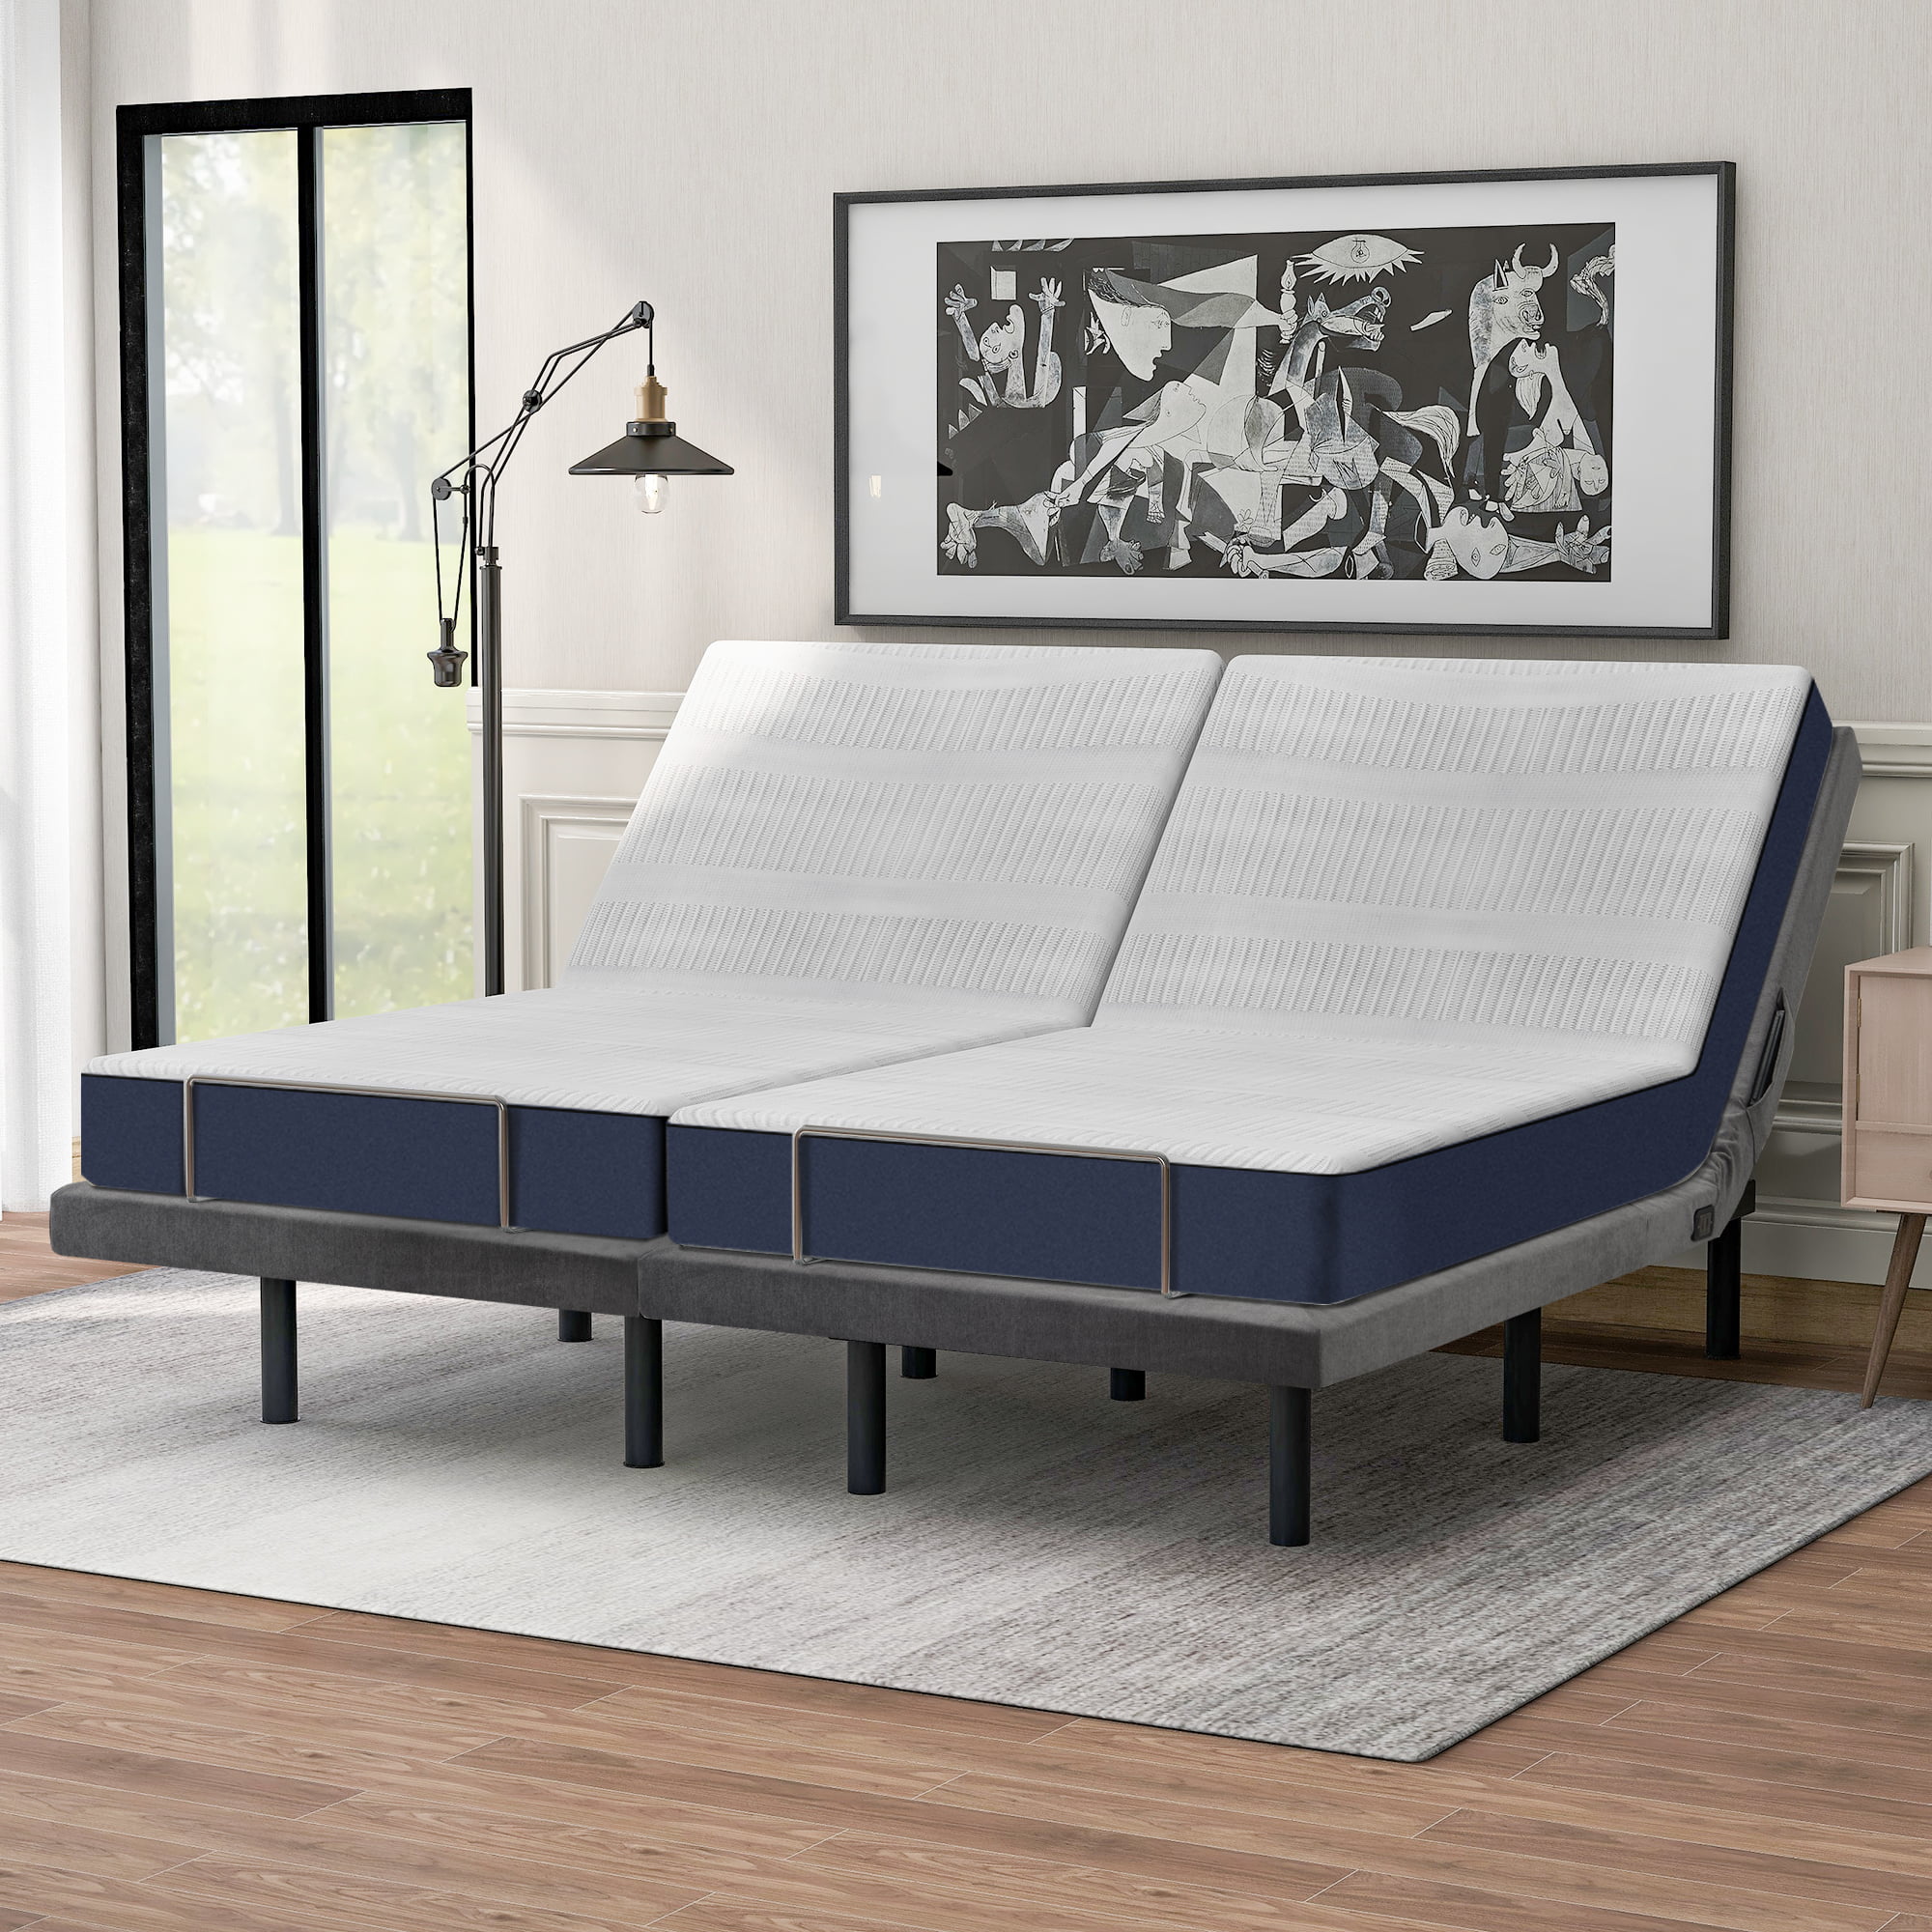 Set Of Two Adjustable Ergonomic Bed, What Size Bed Does 2 Twin Xl Make